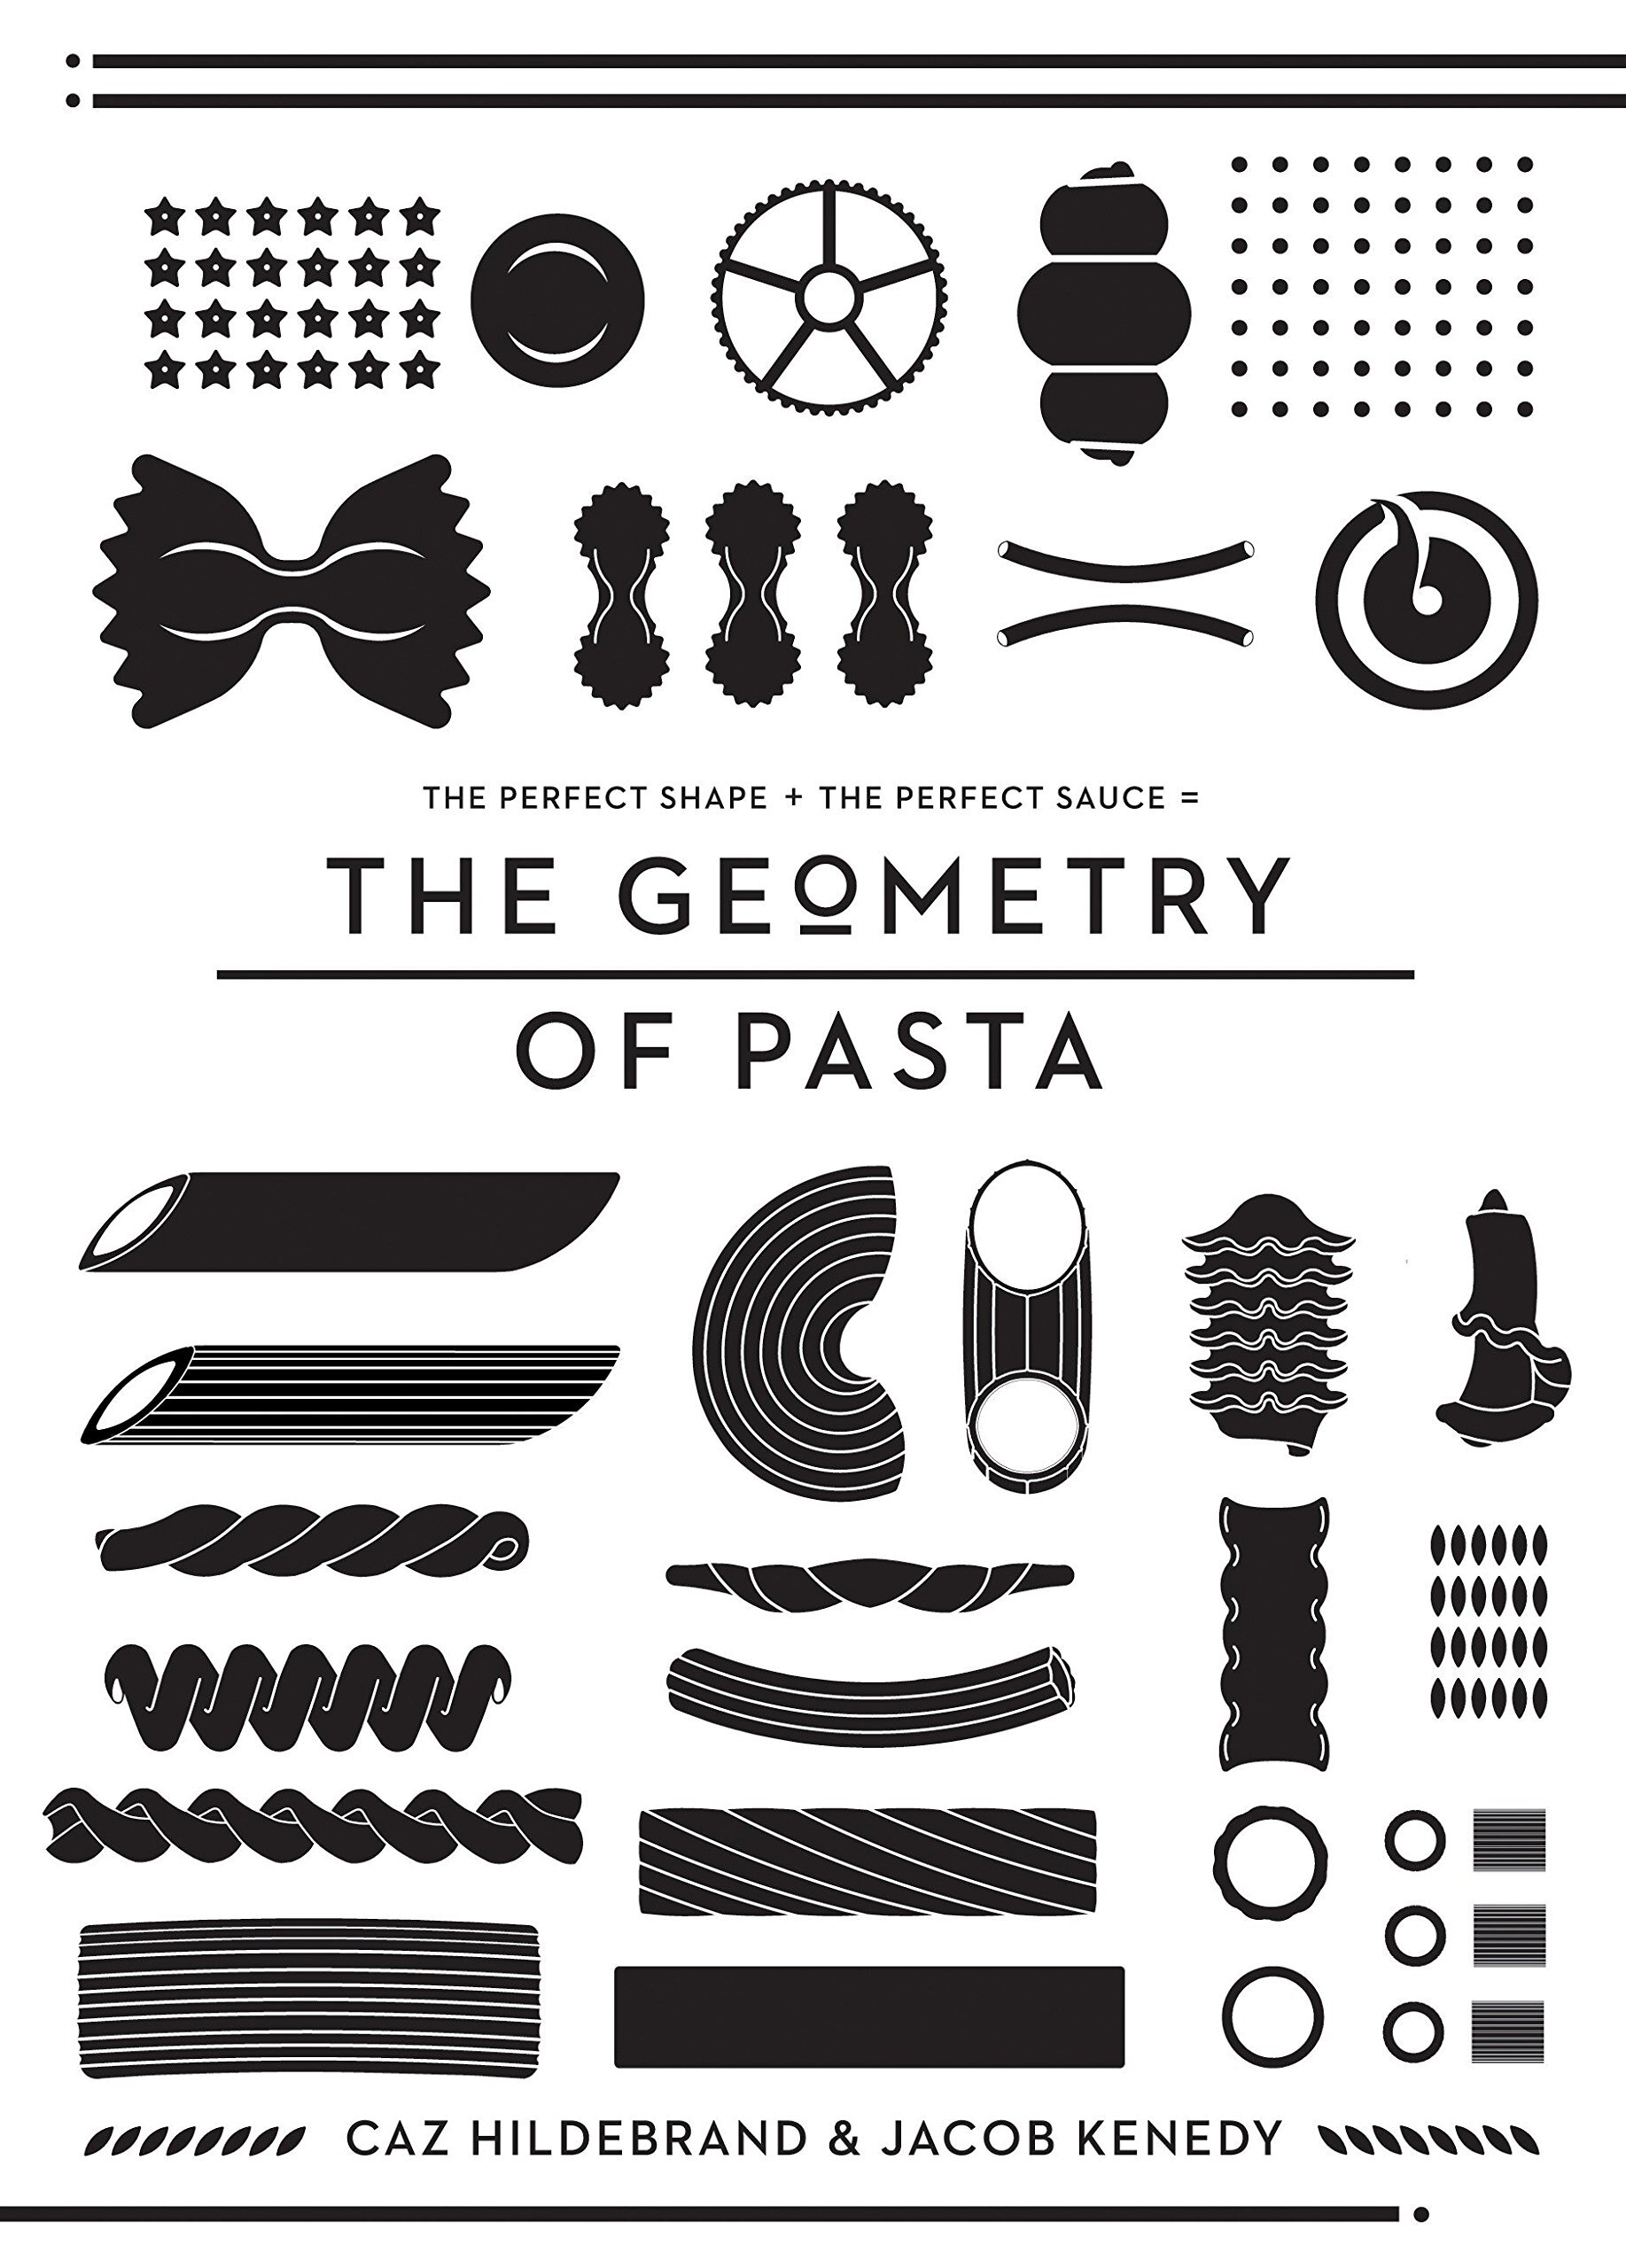 A decade of The Geometry of Pasta – and a lifetime of pasta love